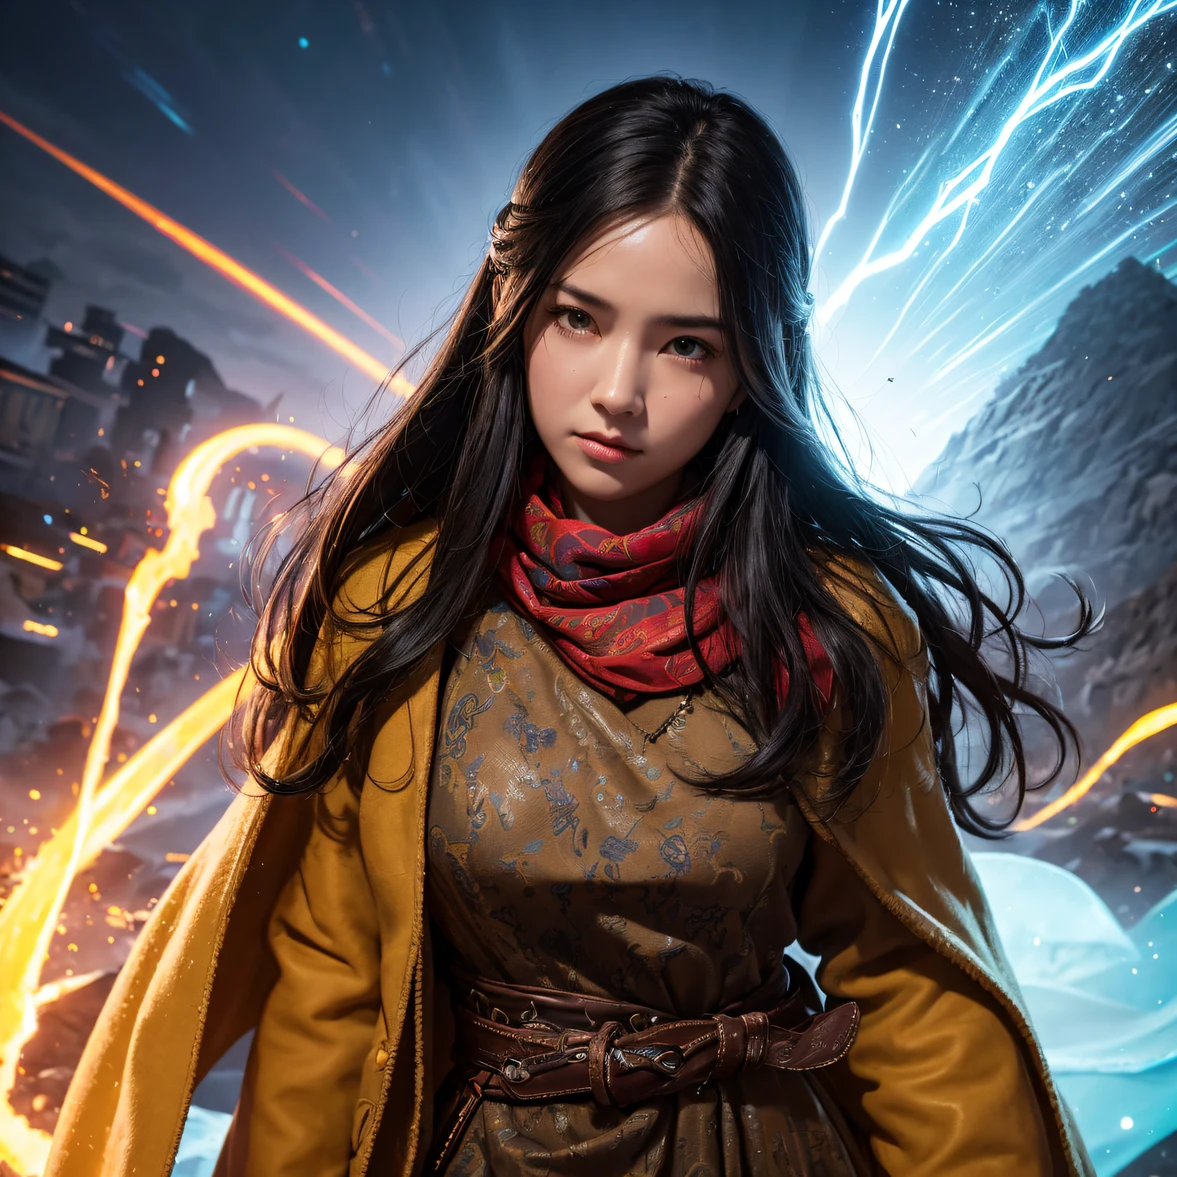 Realistic painting_book_cover:1.3,  goes to the pyramids，CG Giant, Smooth CG art, Realistic. cheng yi, Realistic secret style, A lovely secret rendering, Rendu portrait 8k, Render character art 8 K, Kawaii realistic portrait， （Linen batik scarf）， Angry fighting stance， looking at the ground， Batik linen bandana， Chinese python pattern long-sleeved garment，Uncharted（Abstract propylene splash：1.2）， Dark clouds lightning background，ruins（realisticlying：1.4），Black color hair，Flour fluttering，Telephoto lens high， A high resolution， the detail， RAW photogr， Sharp Re， Nikon D850 Film Stock Photo by Jefferies Lee 4 Kodak Portra 400 Camera F1.6 shots, Rich colors, ultra-realistic vivid textures, Dramatic lighting，8K quality, Girls，Backstreets， Dark clouds lightning background（realisticlying：1.4），Black color hair，Uncharted， RAW photogr， Sharp Re， Nikon D850 Film Stock Photo by Jefferies Lee 4 Kodak Portra 400 Camera F1.6 shots, Rich colors, ultra-realistic vivid textures, Drama light film CG agency，Tropical canyon battle scene、Chinese big breasts、Vintage trench coat、three kingdom、ember、100 people、Faraway view、intense battles、high detal、masuter piece、NSFW，Multi-layered long-sleeved gauze garment，Quick-drying vest，Colorful cotton and linen sweater，Red and black snake cloak cloak，Doomsday ruins（Uncharted）Climb the streets（Armageddon）eyes filled with angry，He clenched his fists